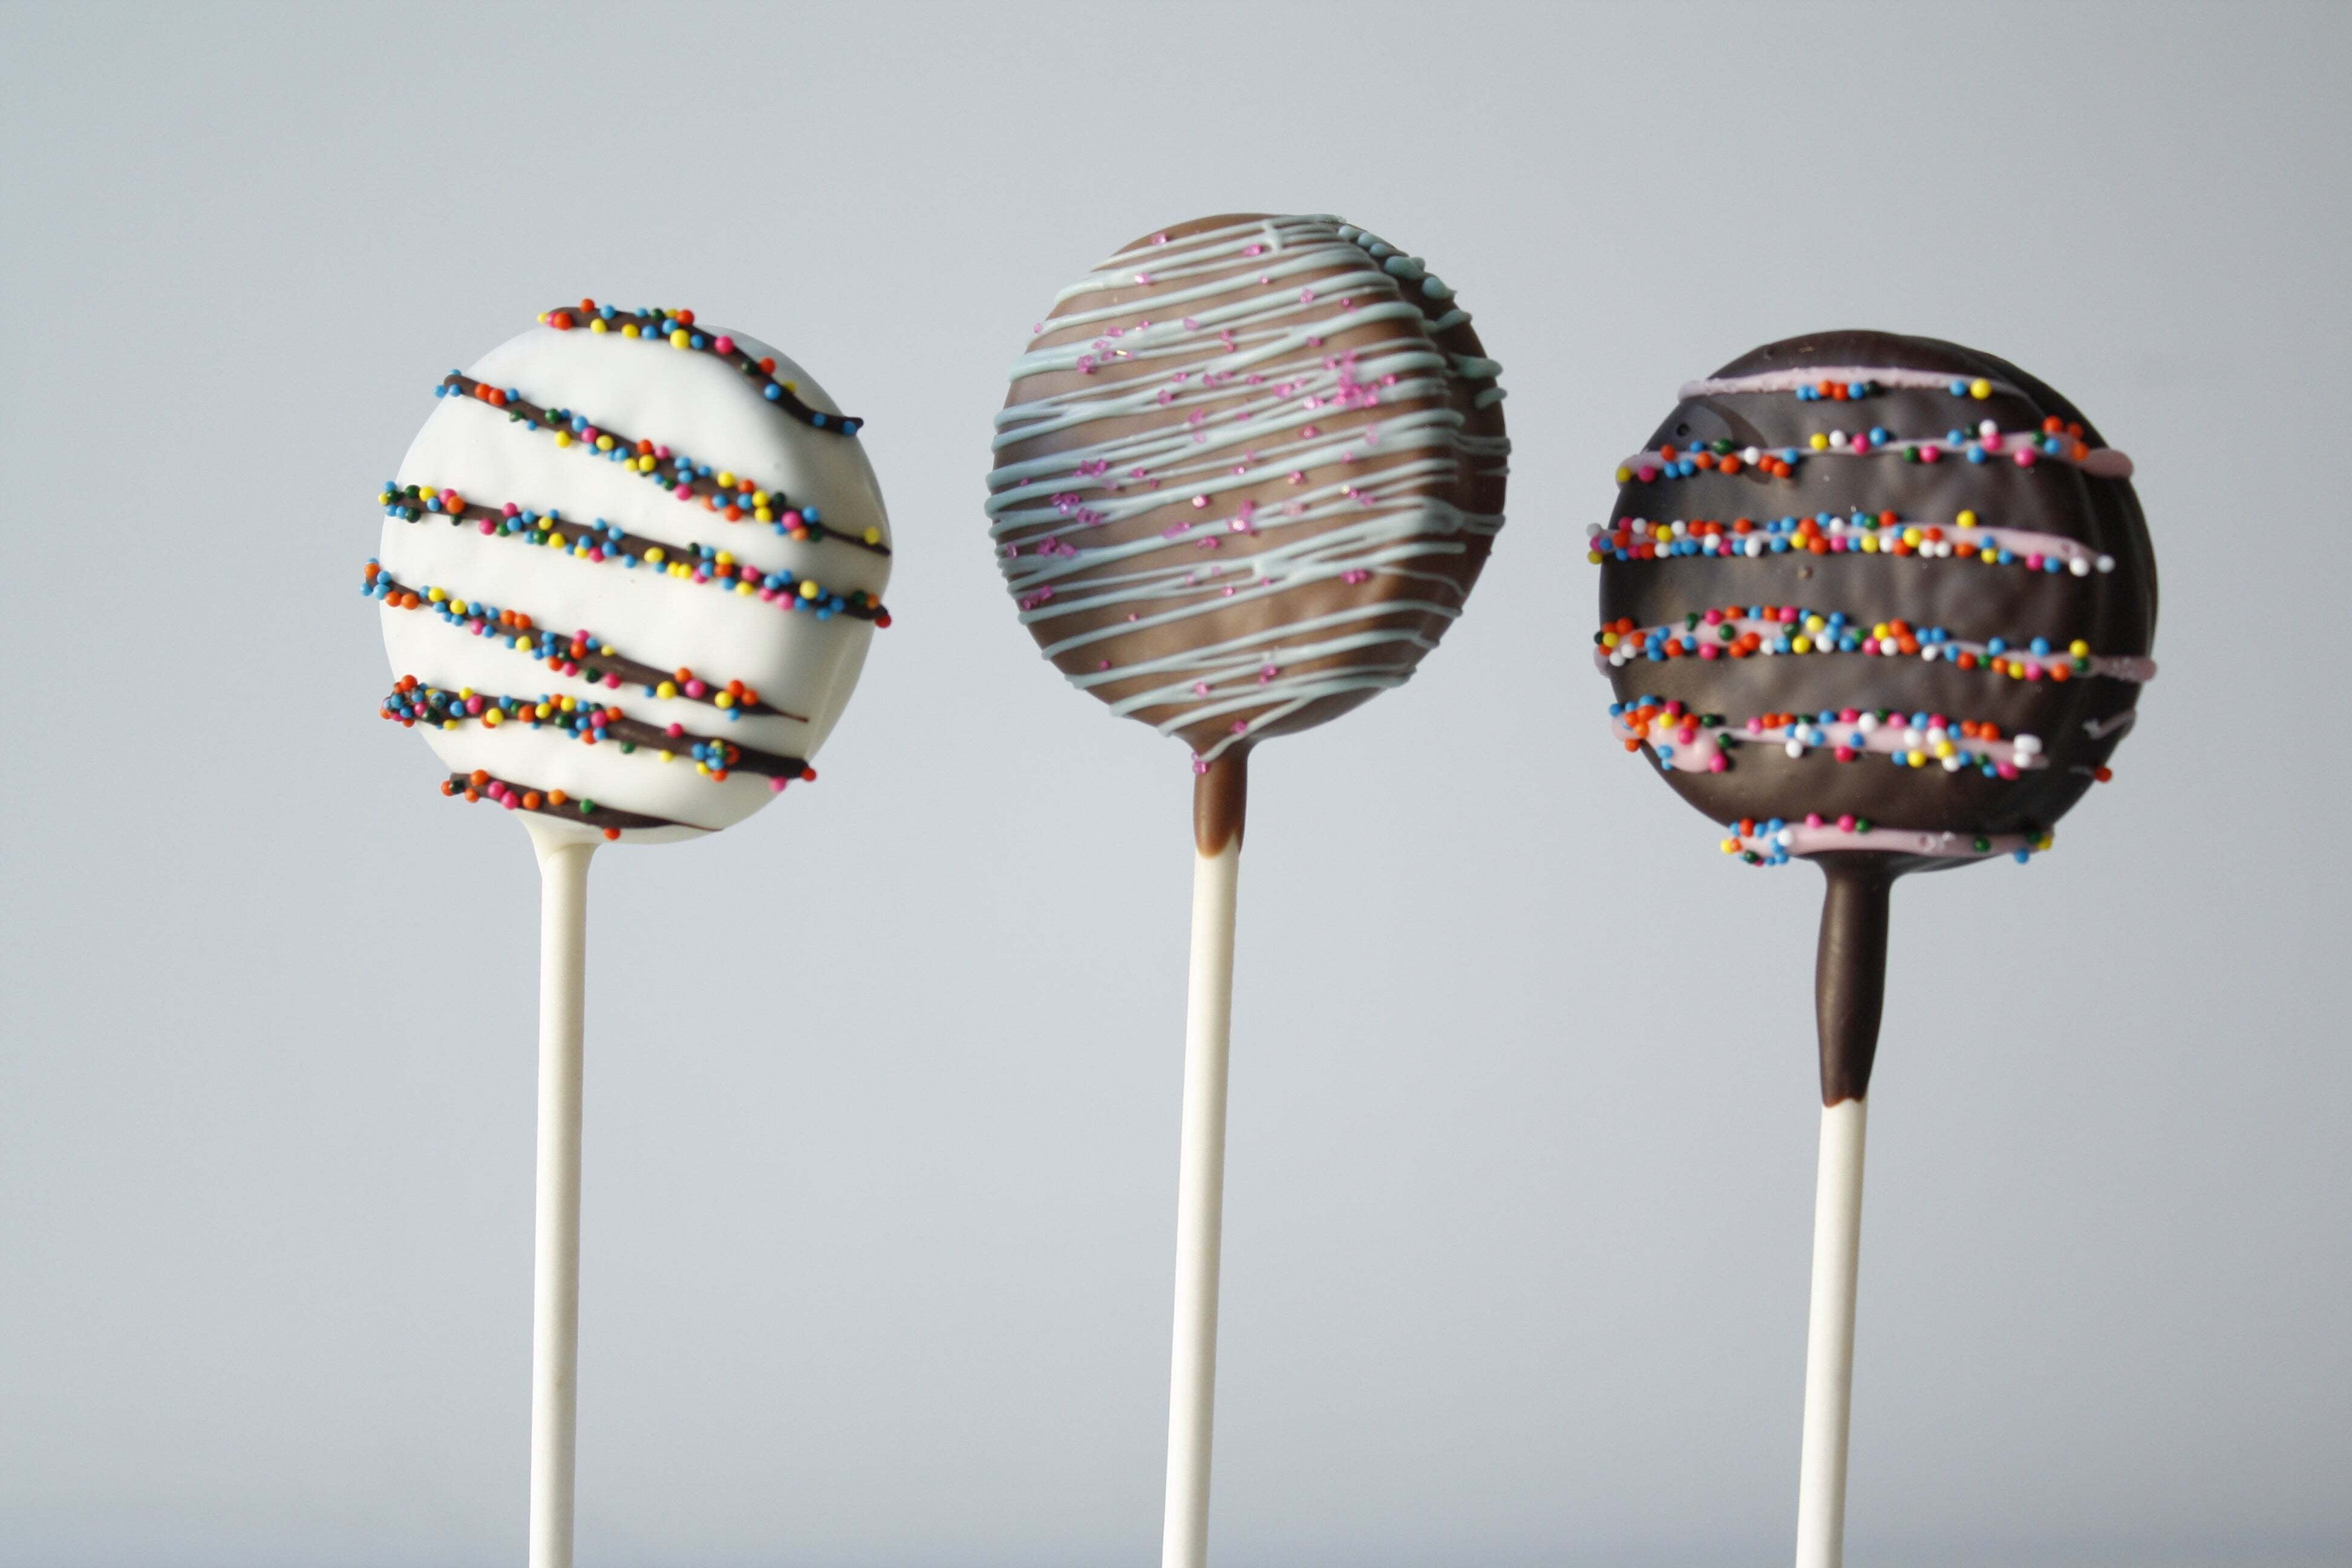 The BEST Cake Pops / Chocolate Dipped - My Urban Treats